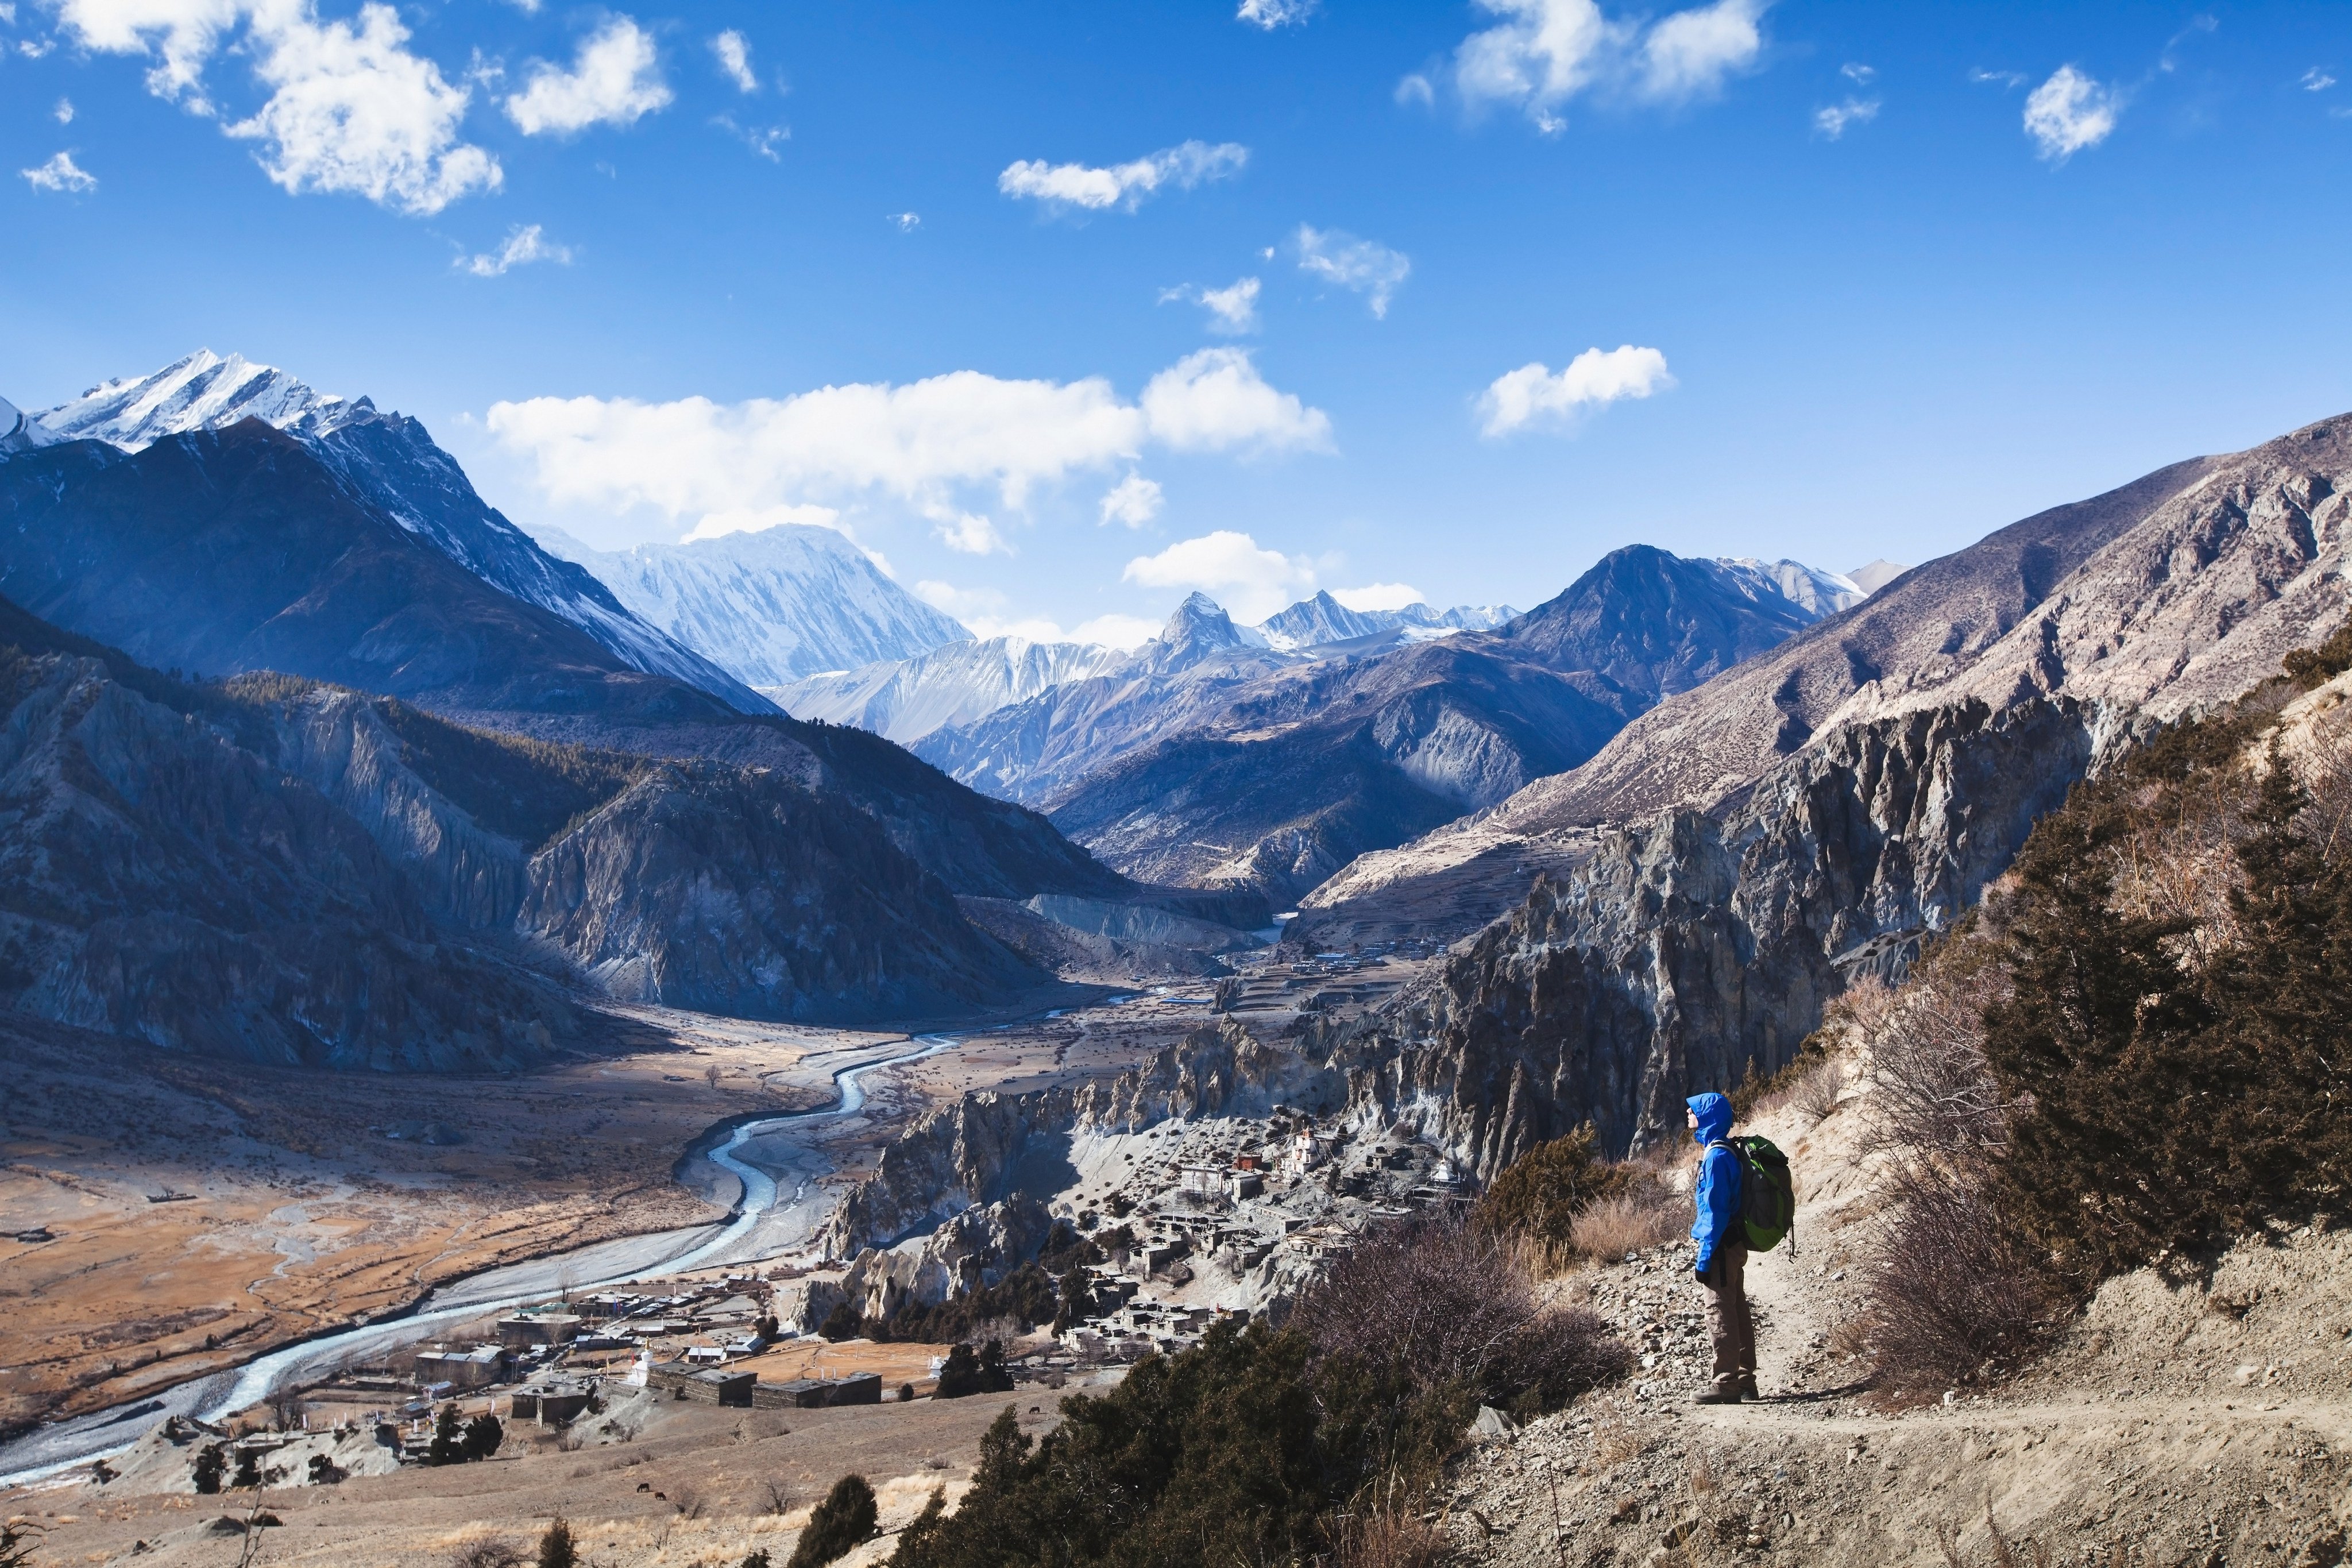 A hiker looks out at mountains on the Annapurna Circuit in Nepal. Photo: Shutterstock